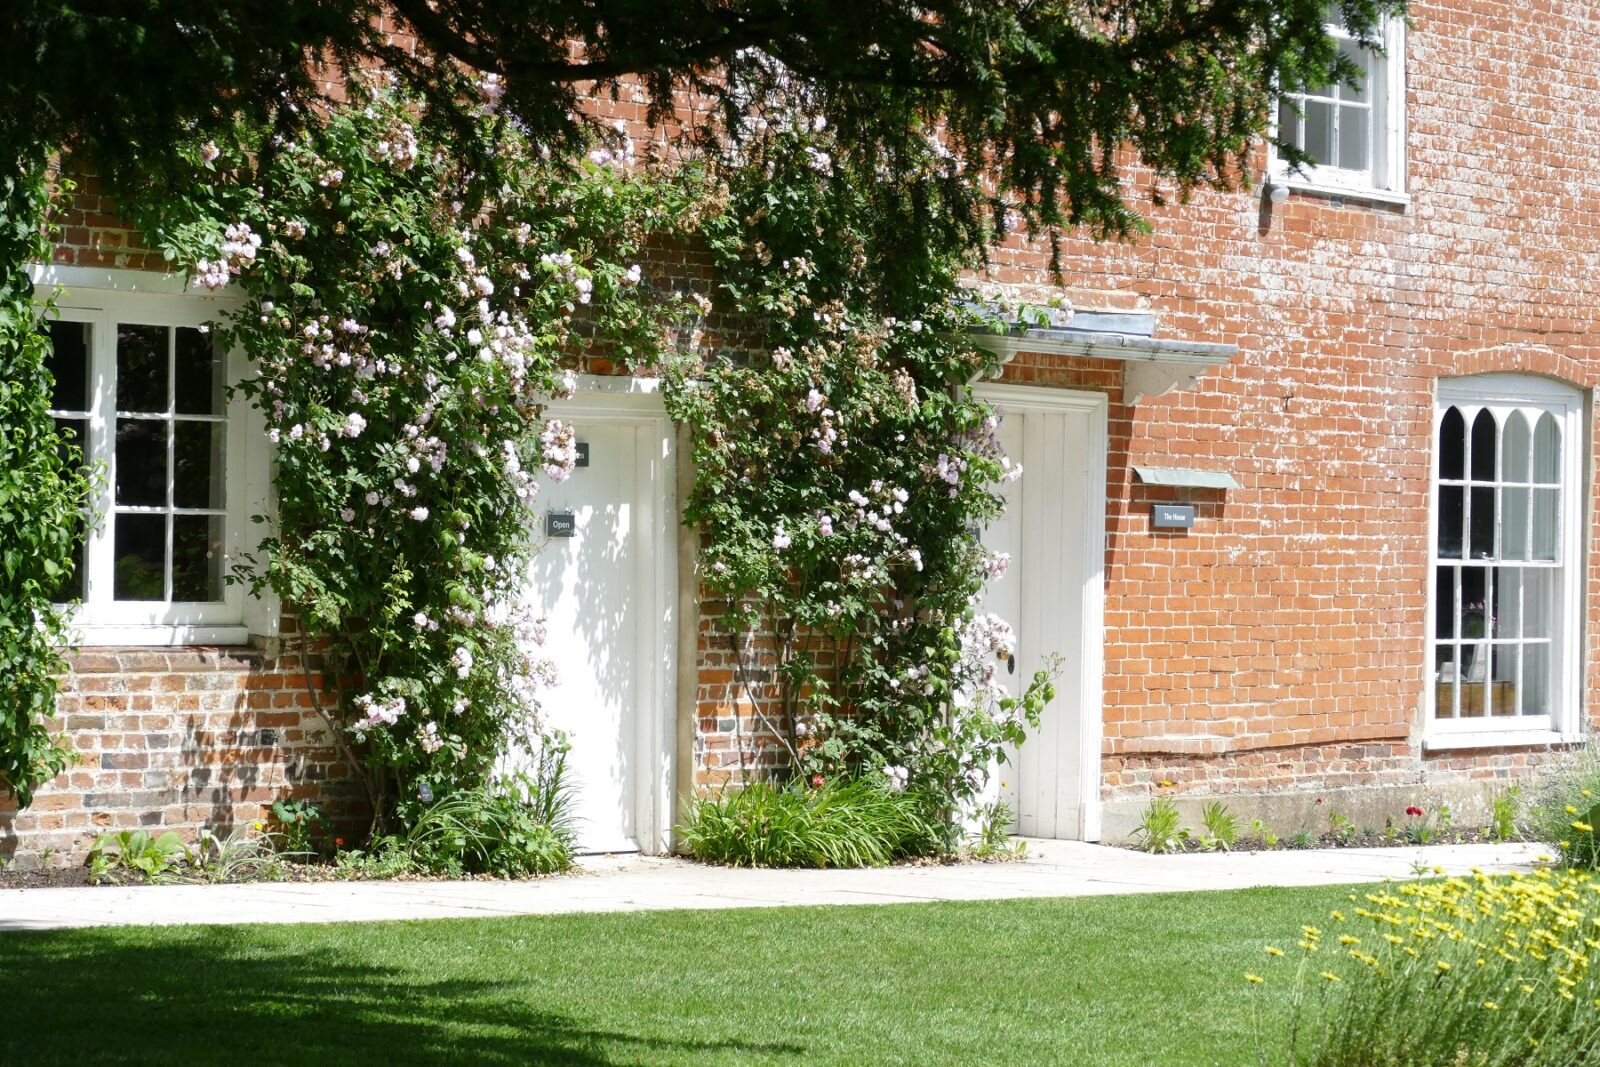 An image of the first floor of a red brick house, with two white doors. Roses surround the doors.